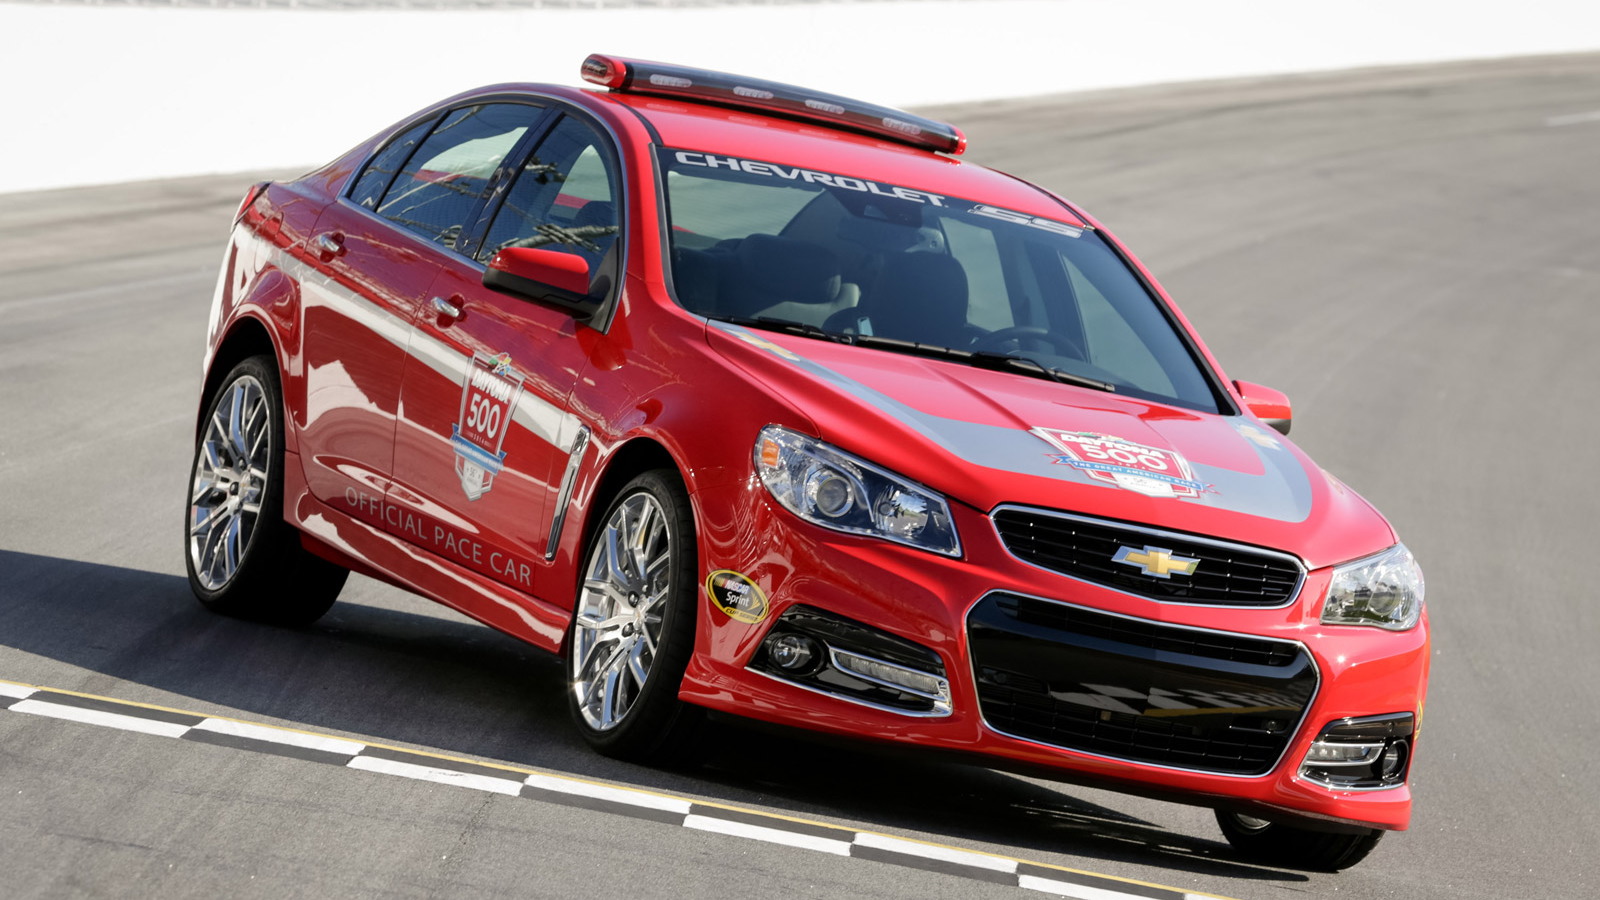 2014 Chevrolet SS pace car